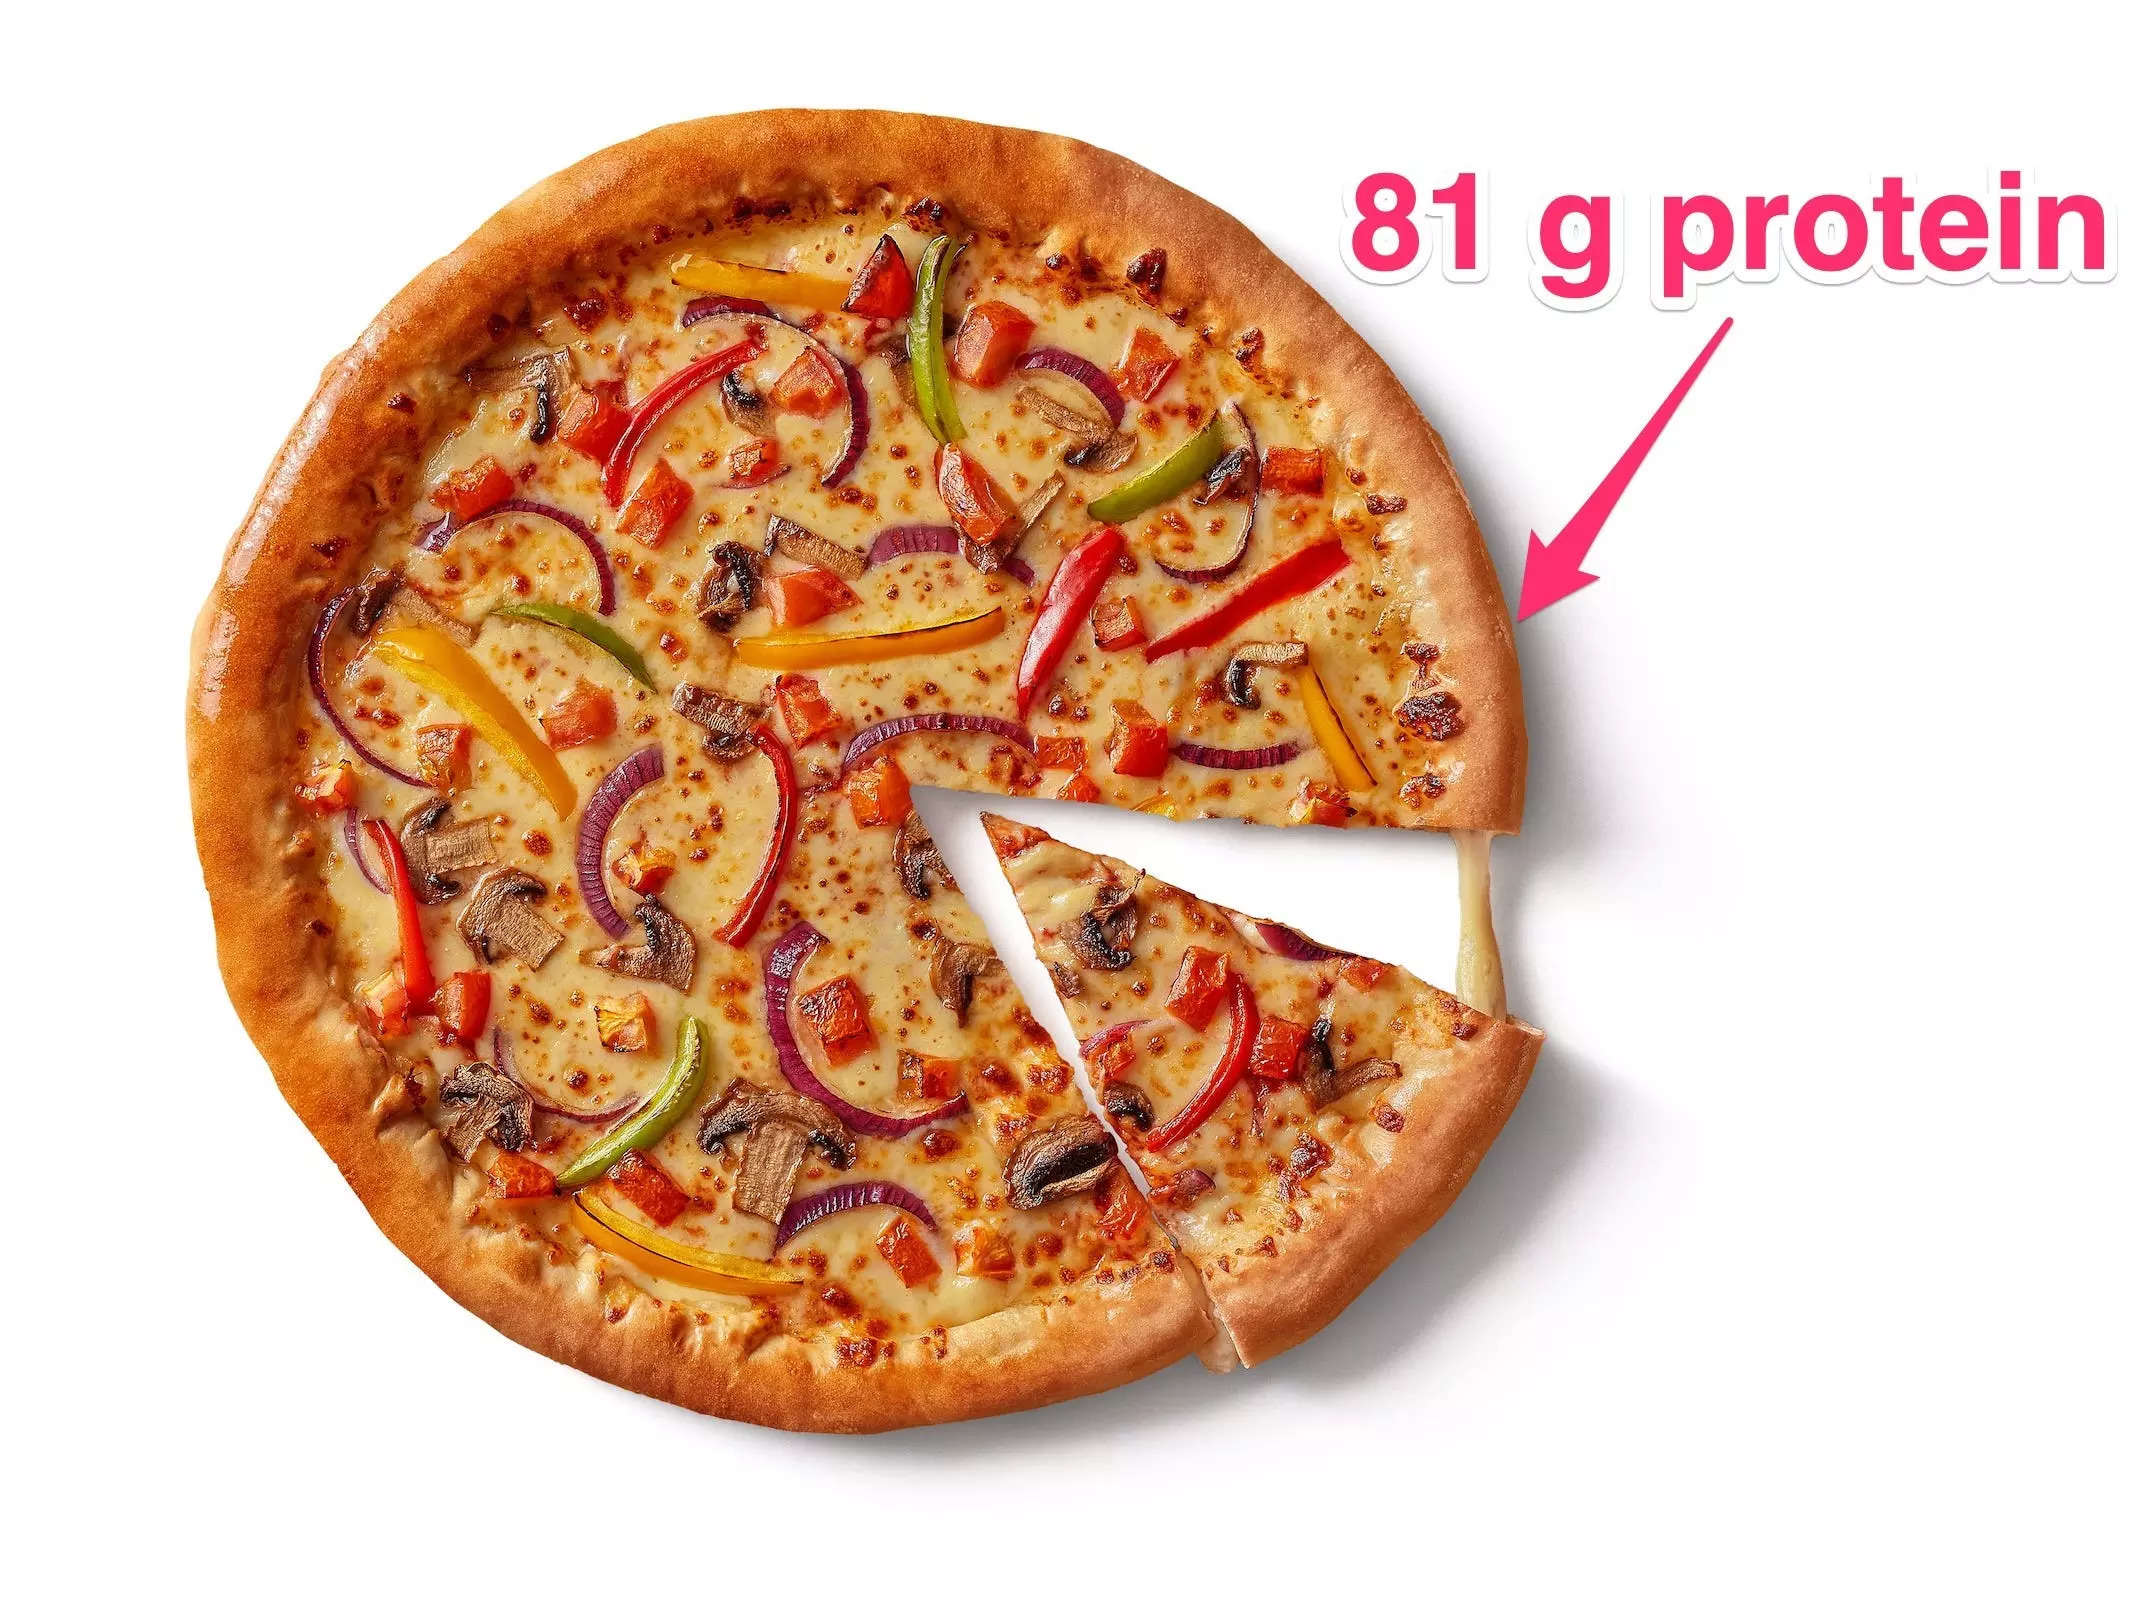 We asked 3 nutritionists what they would order at Pizza Hut for a